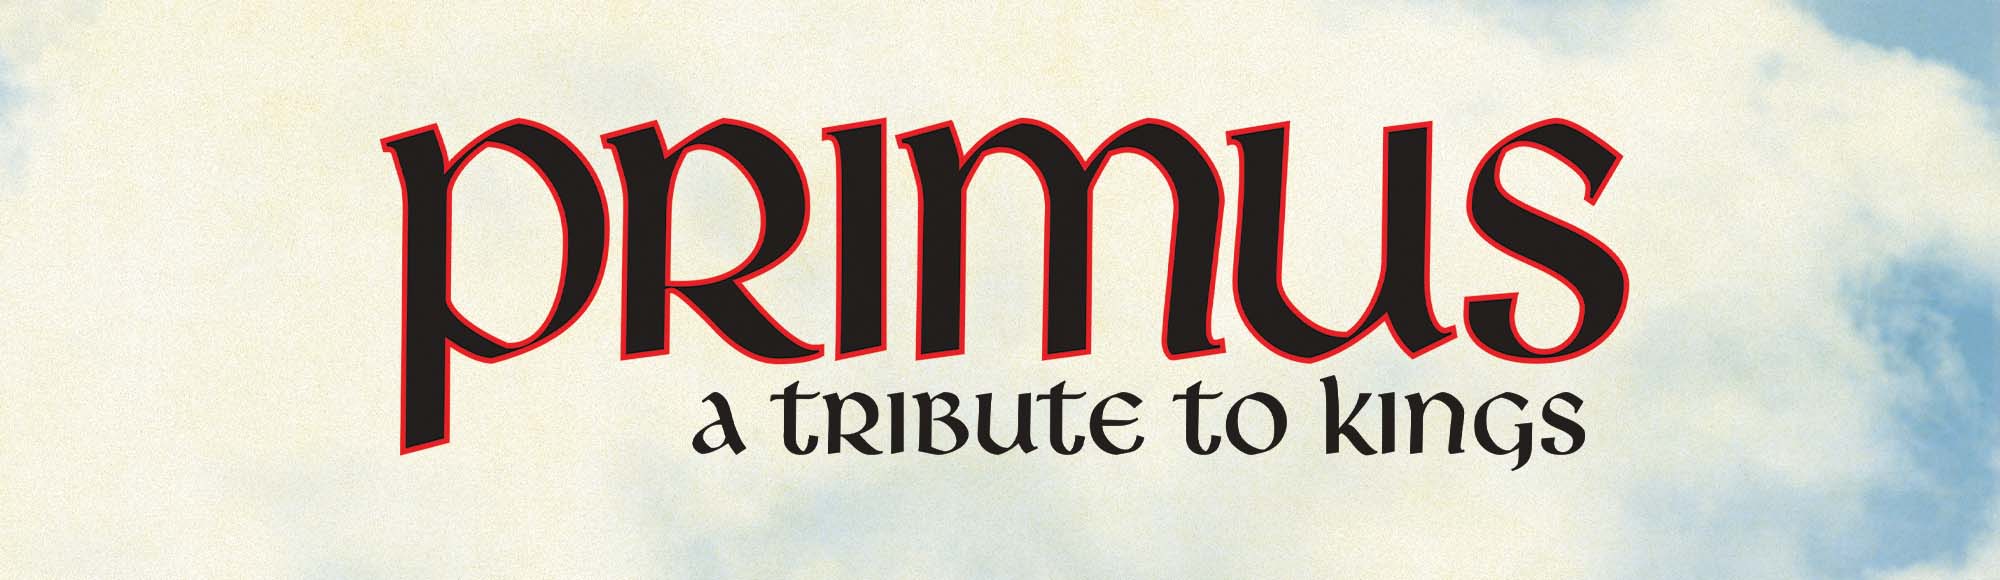 Primus: A Tribute to Kings show